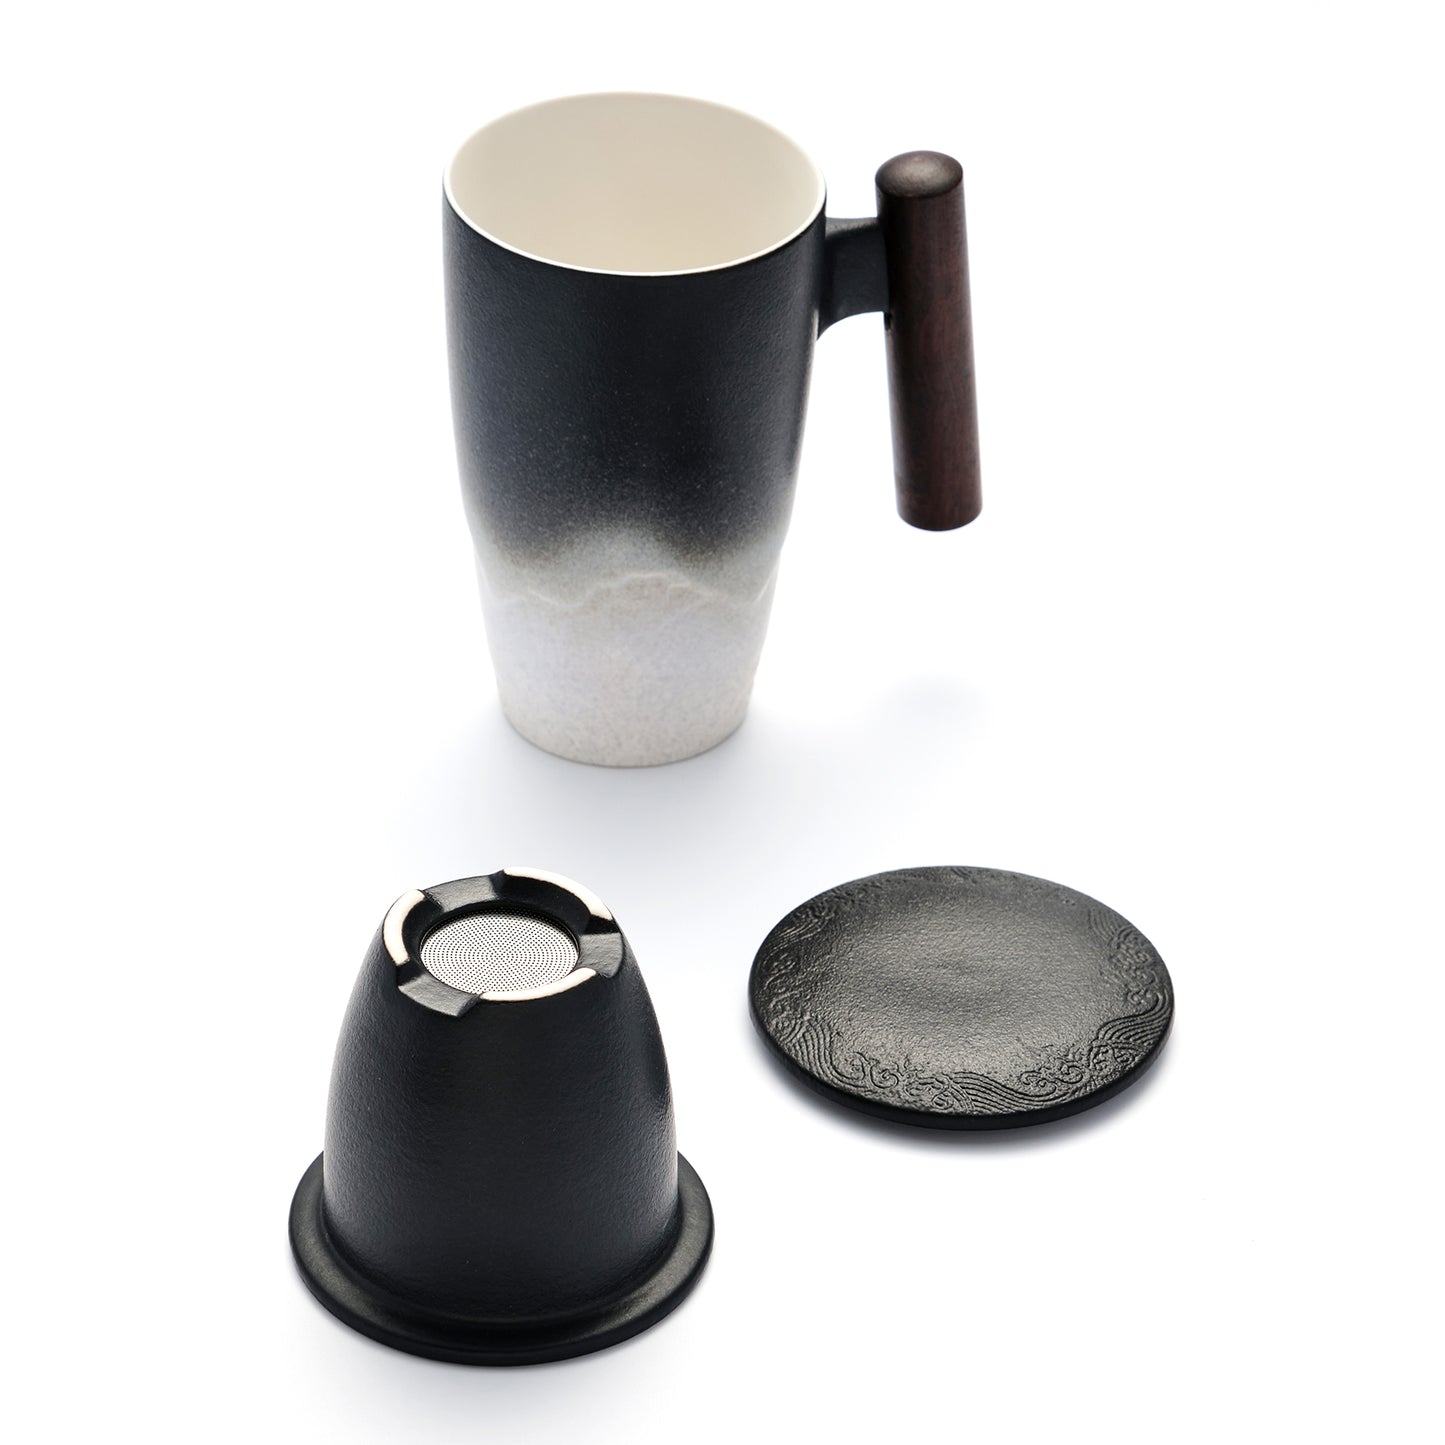 Tomotime Ceramic Tea Cup with Infuser and Lid Tea Mugs Wooden Handle 400ml/13.5oz (Black White)